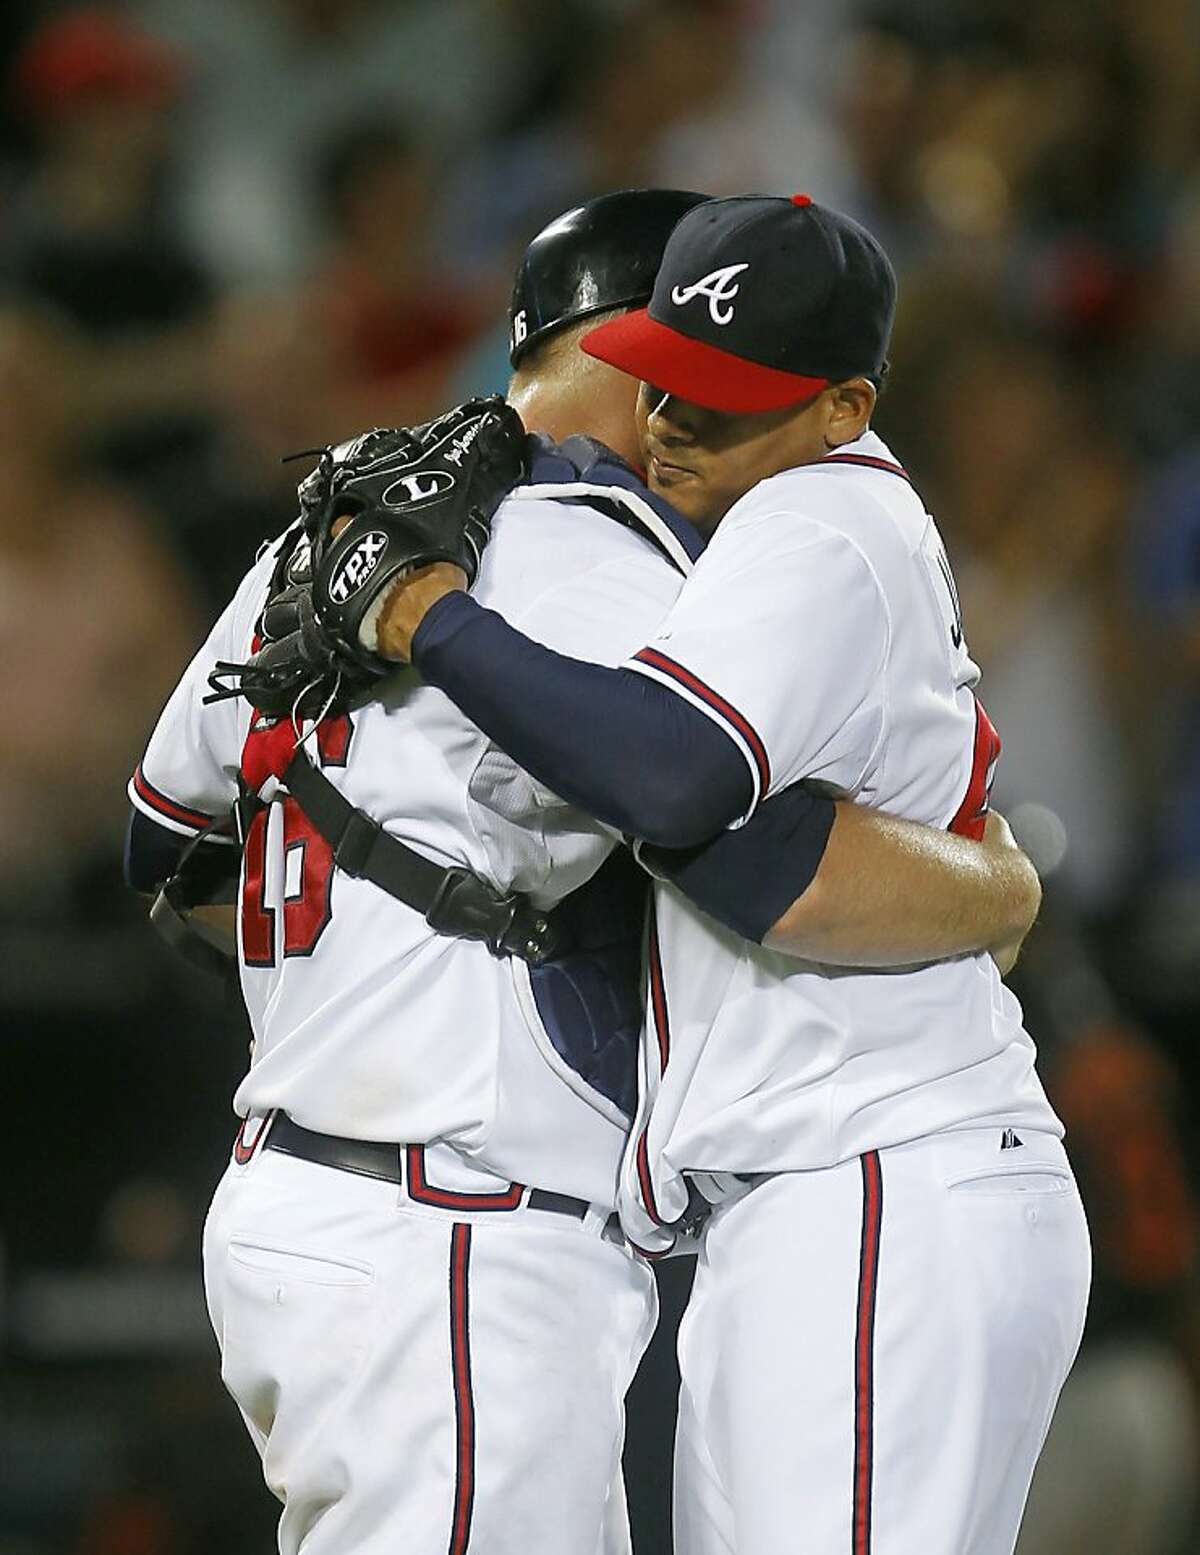 Atlanta Braves starting pitcher Jair Jurrjens, right, embraces catcher Brian McCann after shutting out Baltimore Orioles of an interleague baseball game in Atlanta, Friday, July 1, 2011. Jurrjens earned his 11th win of the season with a one-hit shutout. Atlanta won 4-0.